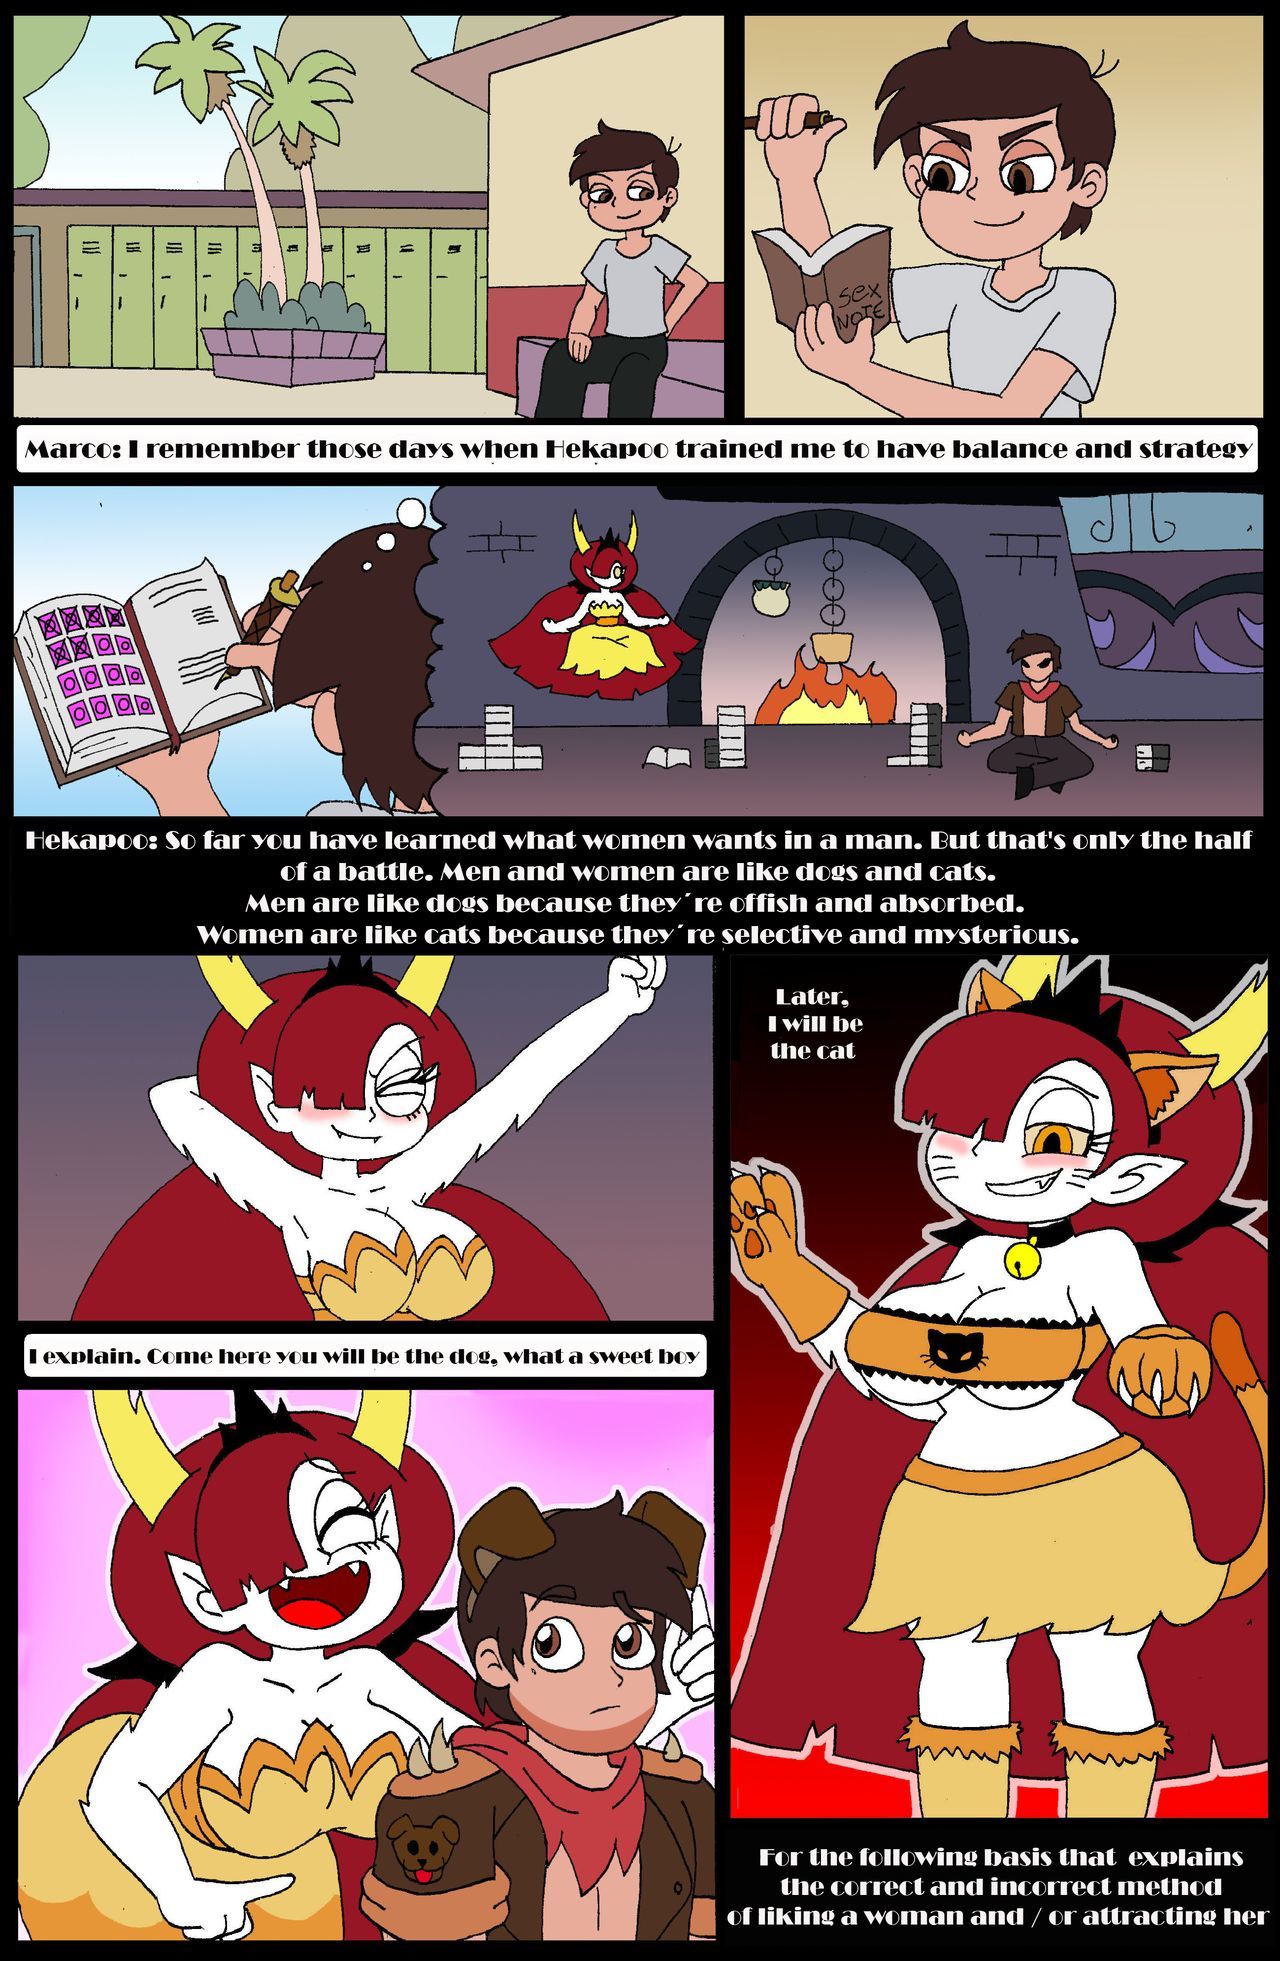 Playing with Fire (Star vs. the Forces of Evil) by Ferozyraptor page 39